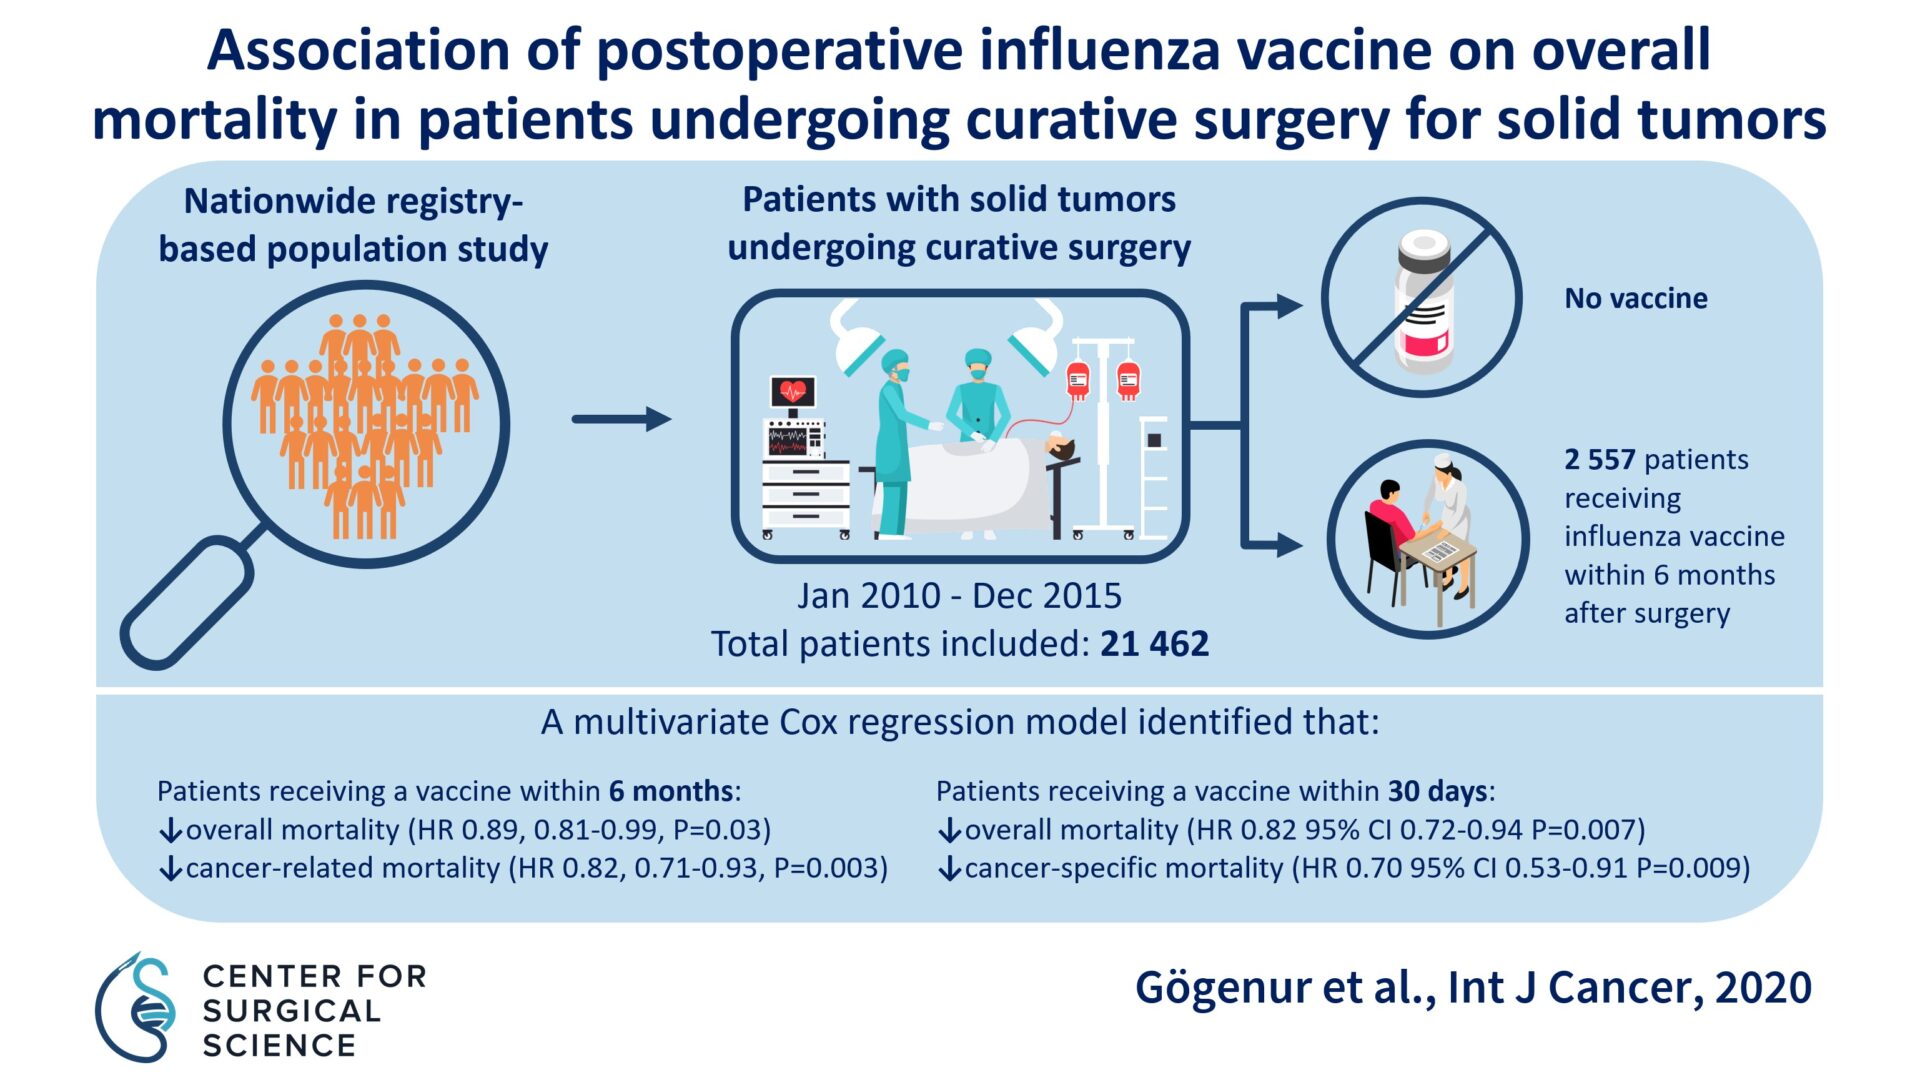 Association of postoperative influenza vaccine on overall mortality in patients undergoing curative surgery for solid tumors